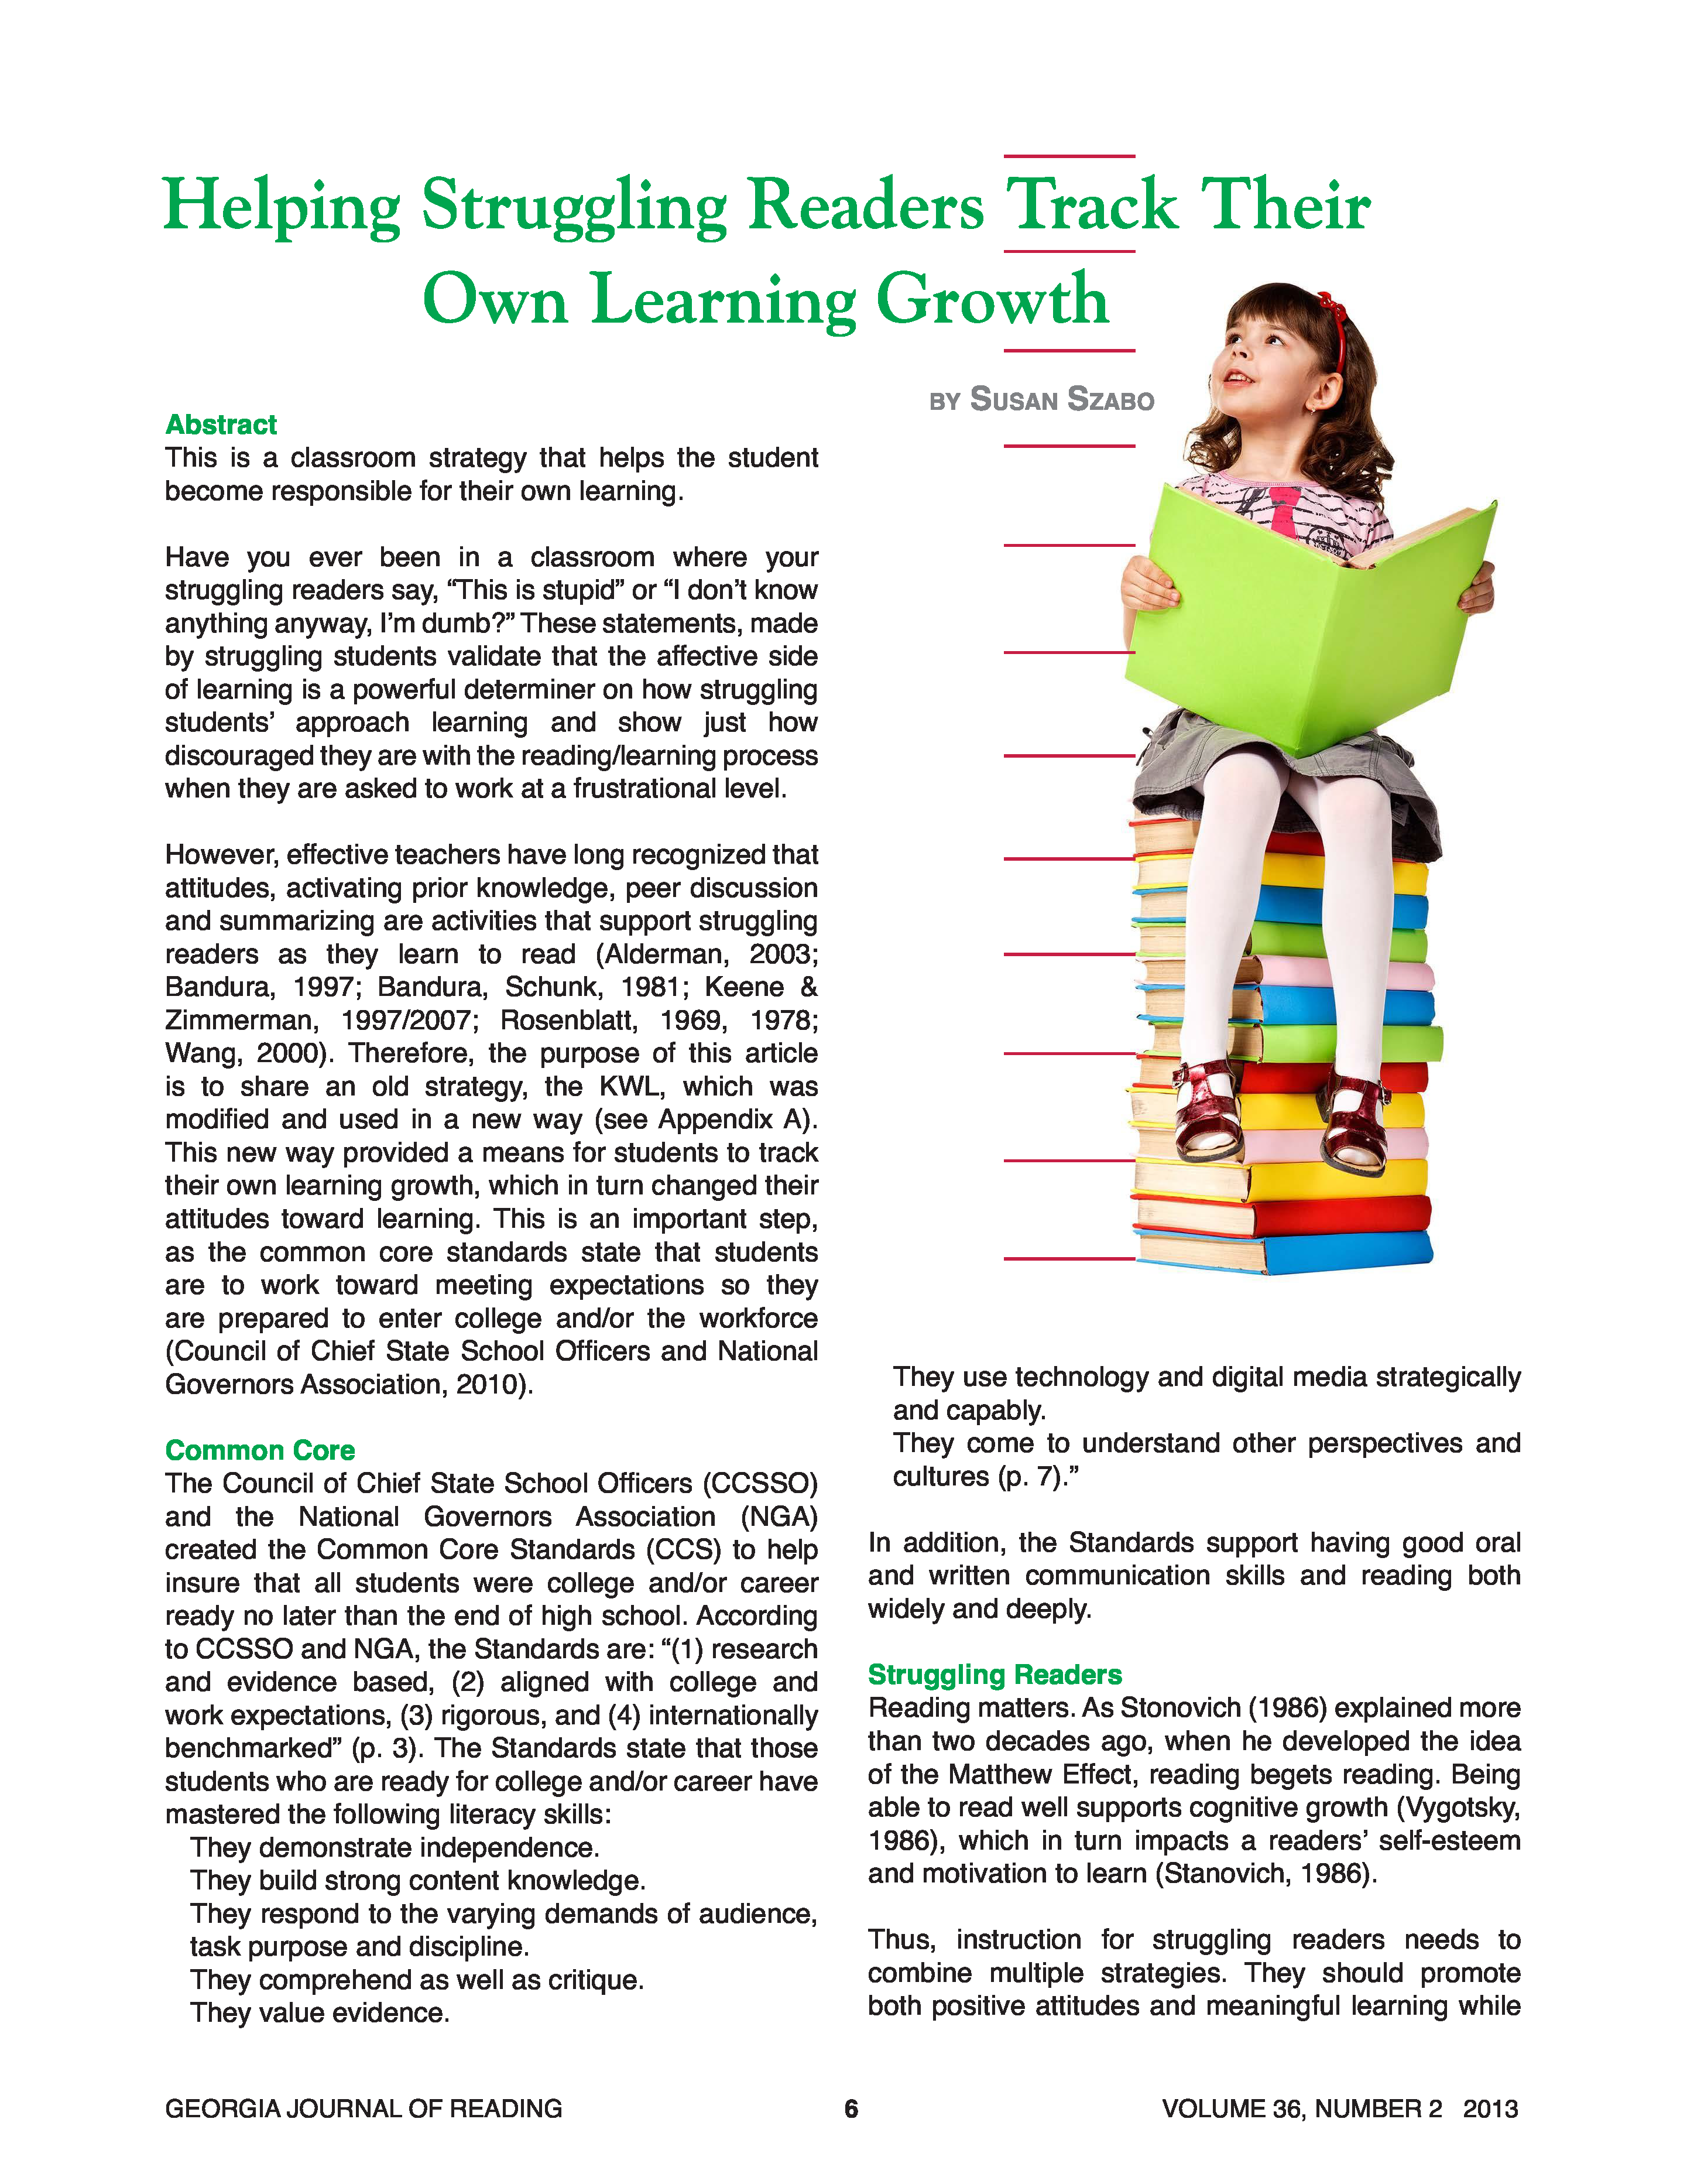 Helping Struggling Readers Track Their Own Learning Growth